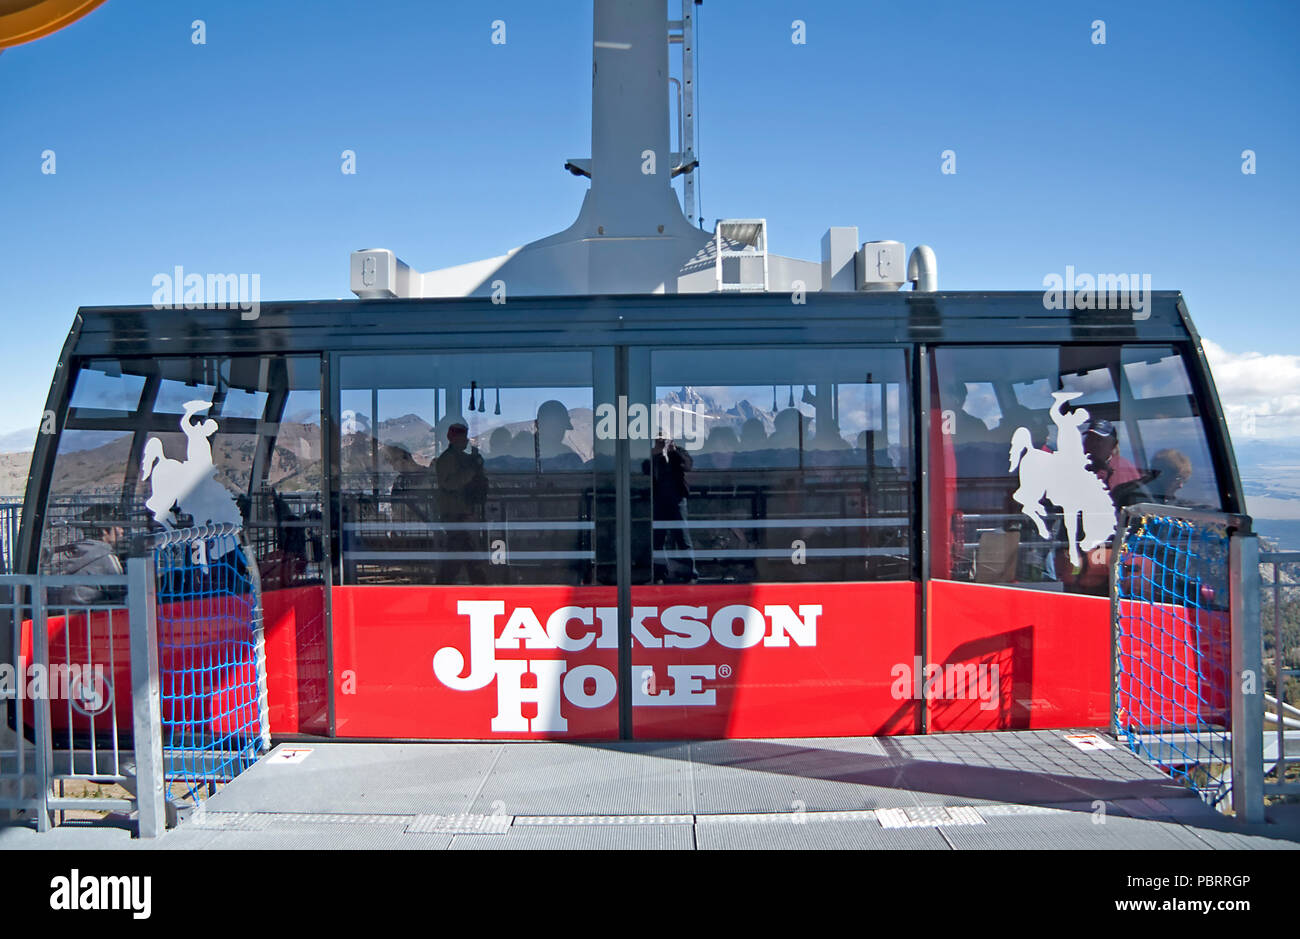 A view of the Jackson Hole Aerial Tram, or 'Big Red' as it's  also known, taken at the top of Rendezvous Mountain. What a view! With the wind that Sep Stock Photo